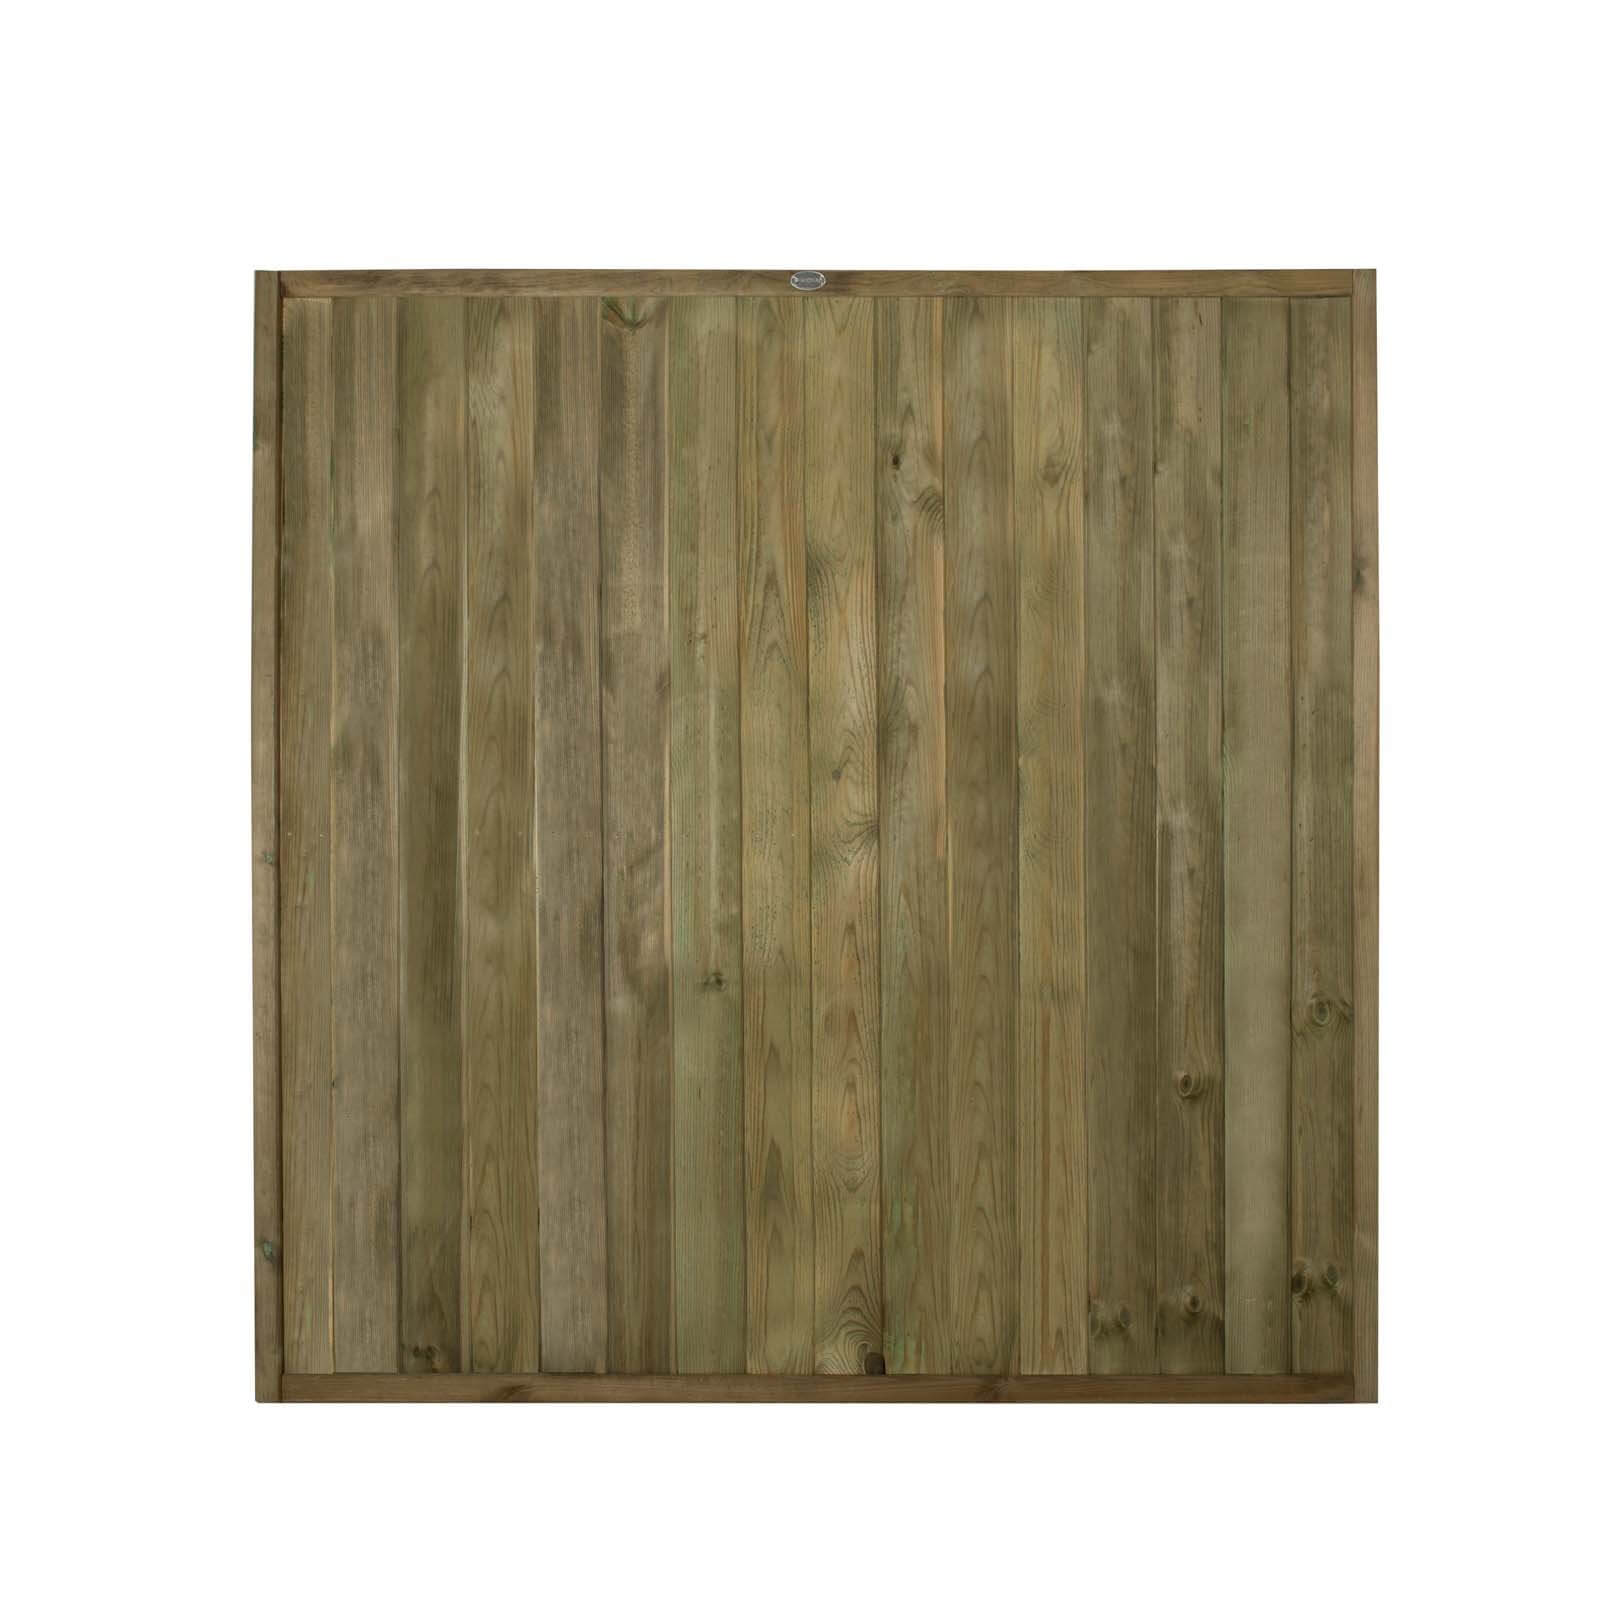 Timberdale Square Board Panel - 1828 x 1828 x 47mm